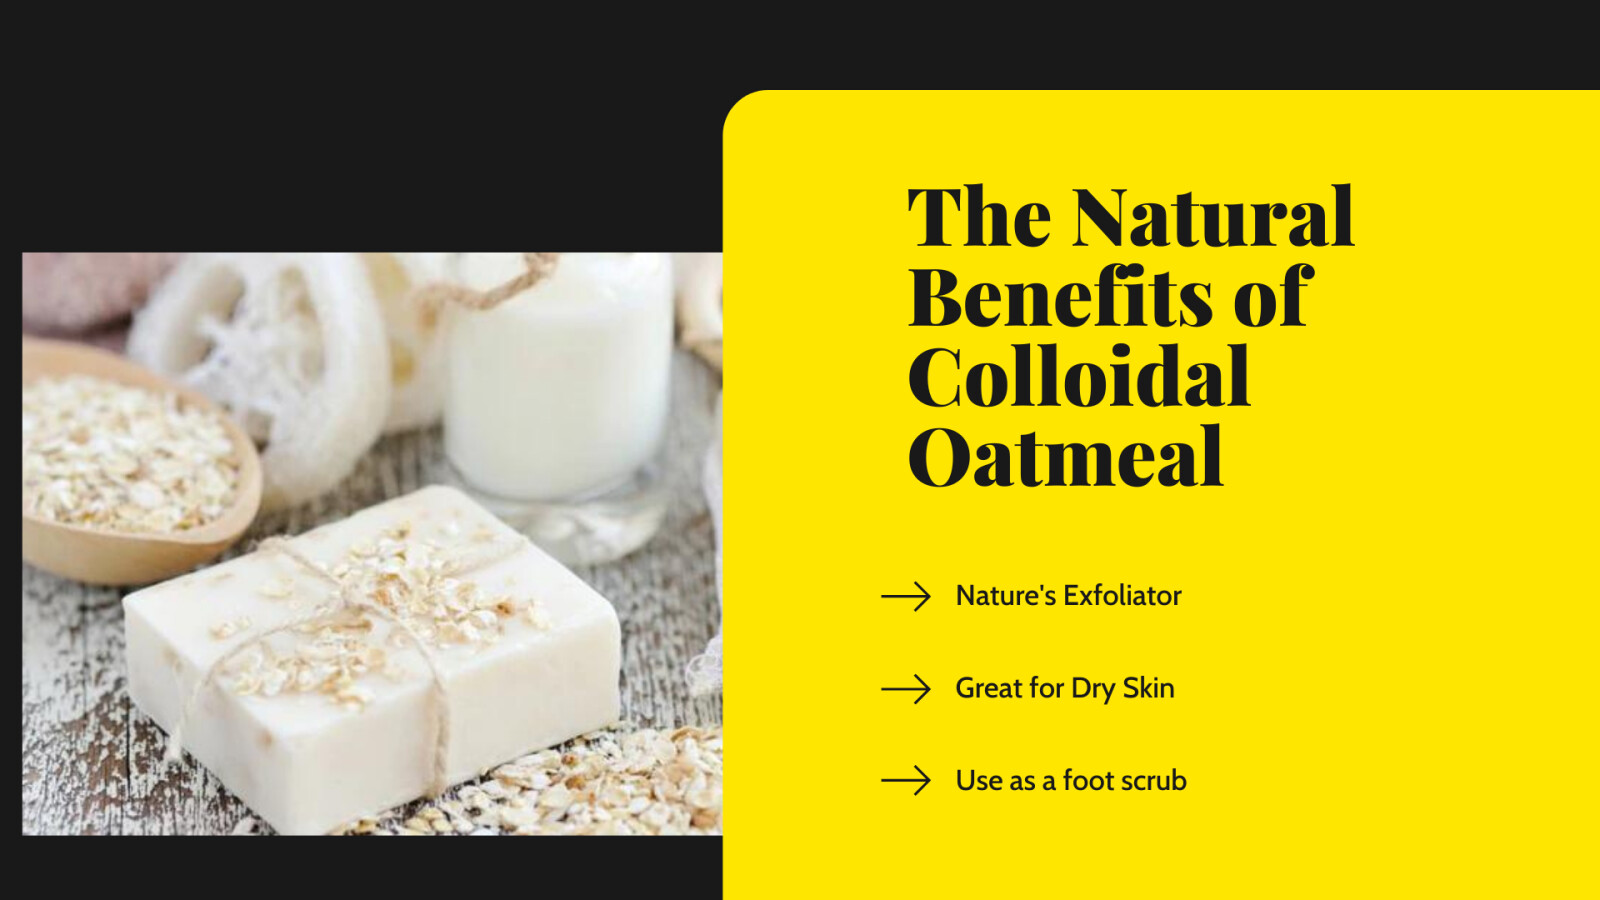 The Benefits of Oatmeal